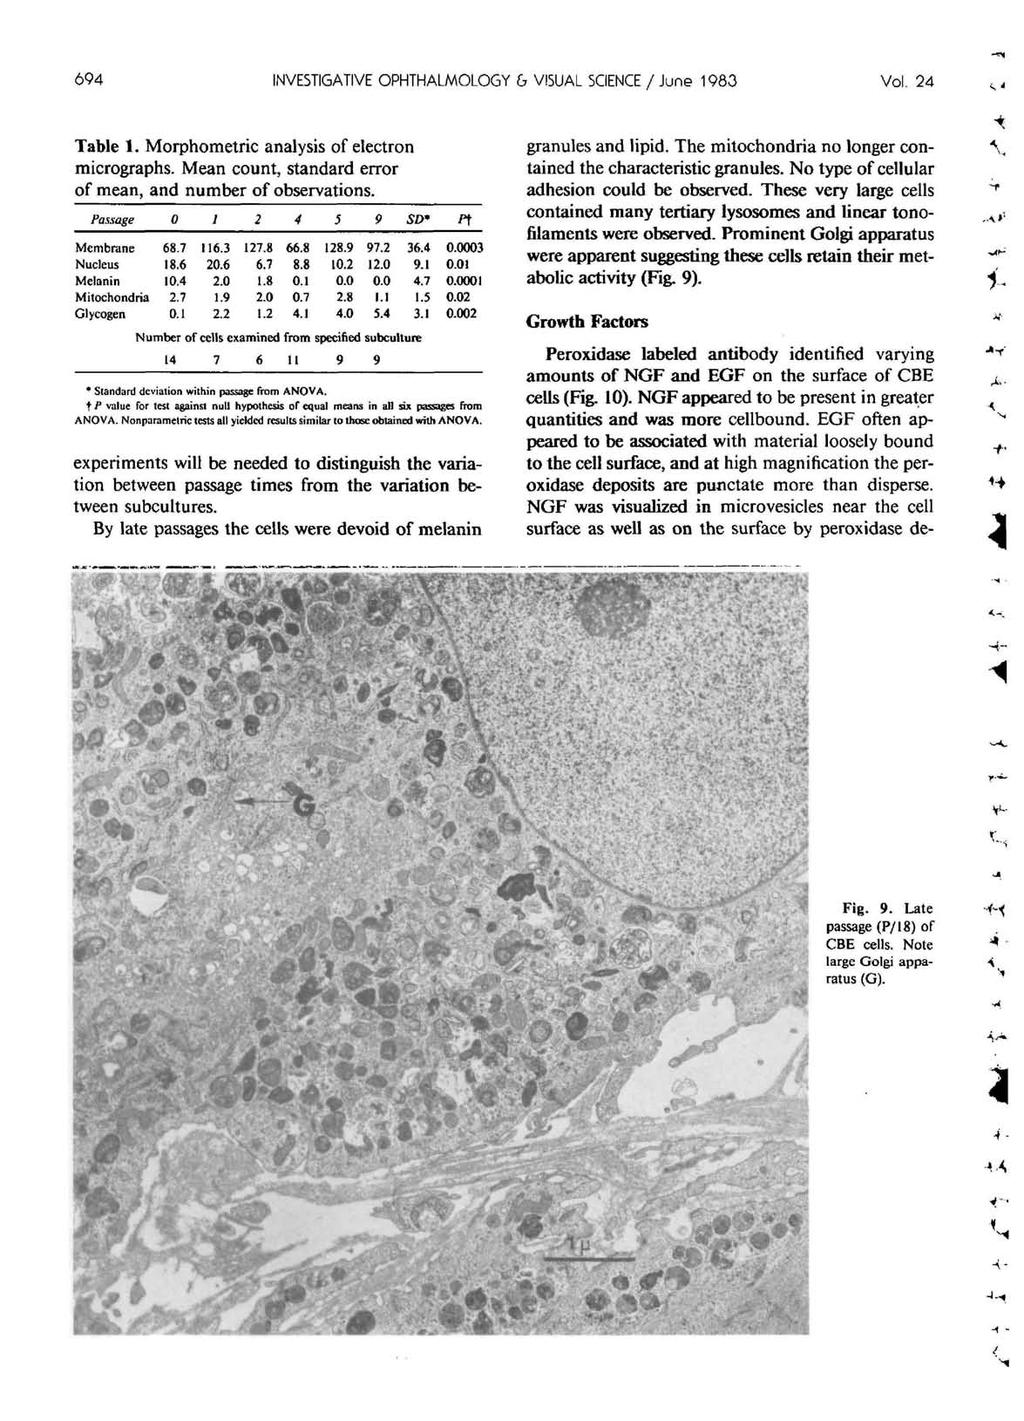 694 INVESTIGATIVE OPHTHALMOLOGY & VI5UAL SCIENCE / June 1983 Vol. 24 Table 1. Morphometric analysis of electron micrographs. Mean count, standard error of mean, and number of observations.